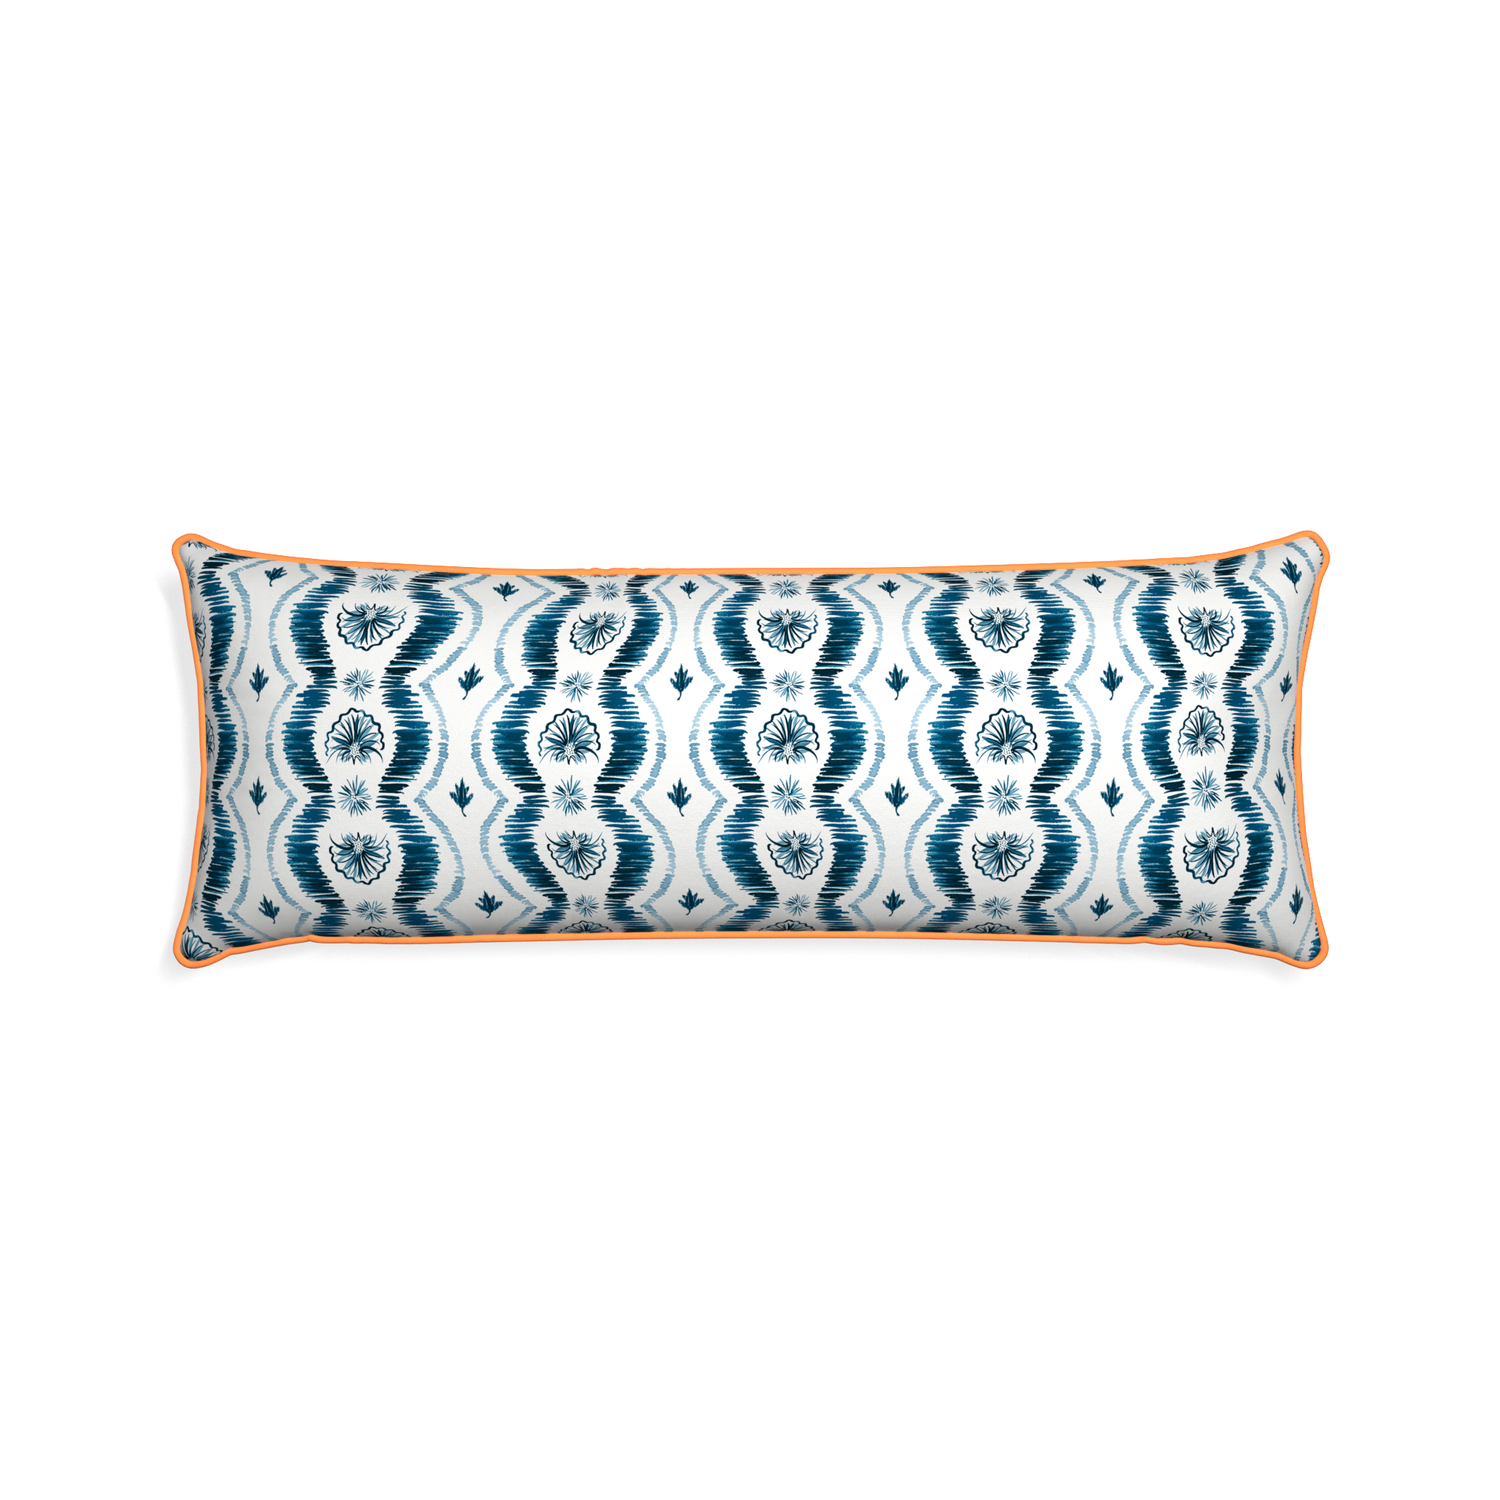 Xl-lumbar alice custom blue ikatpillow with clementine piping on white background